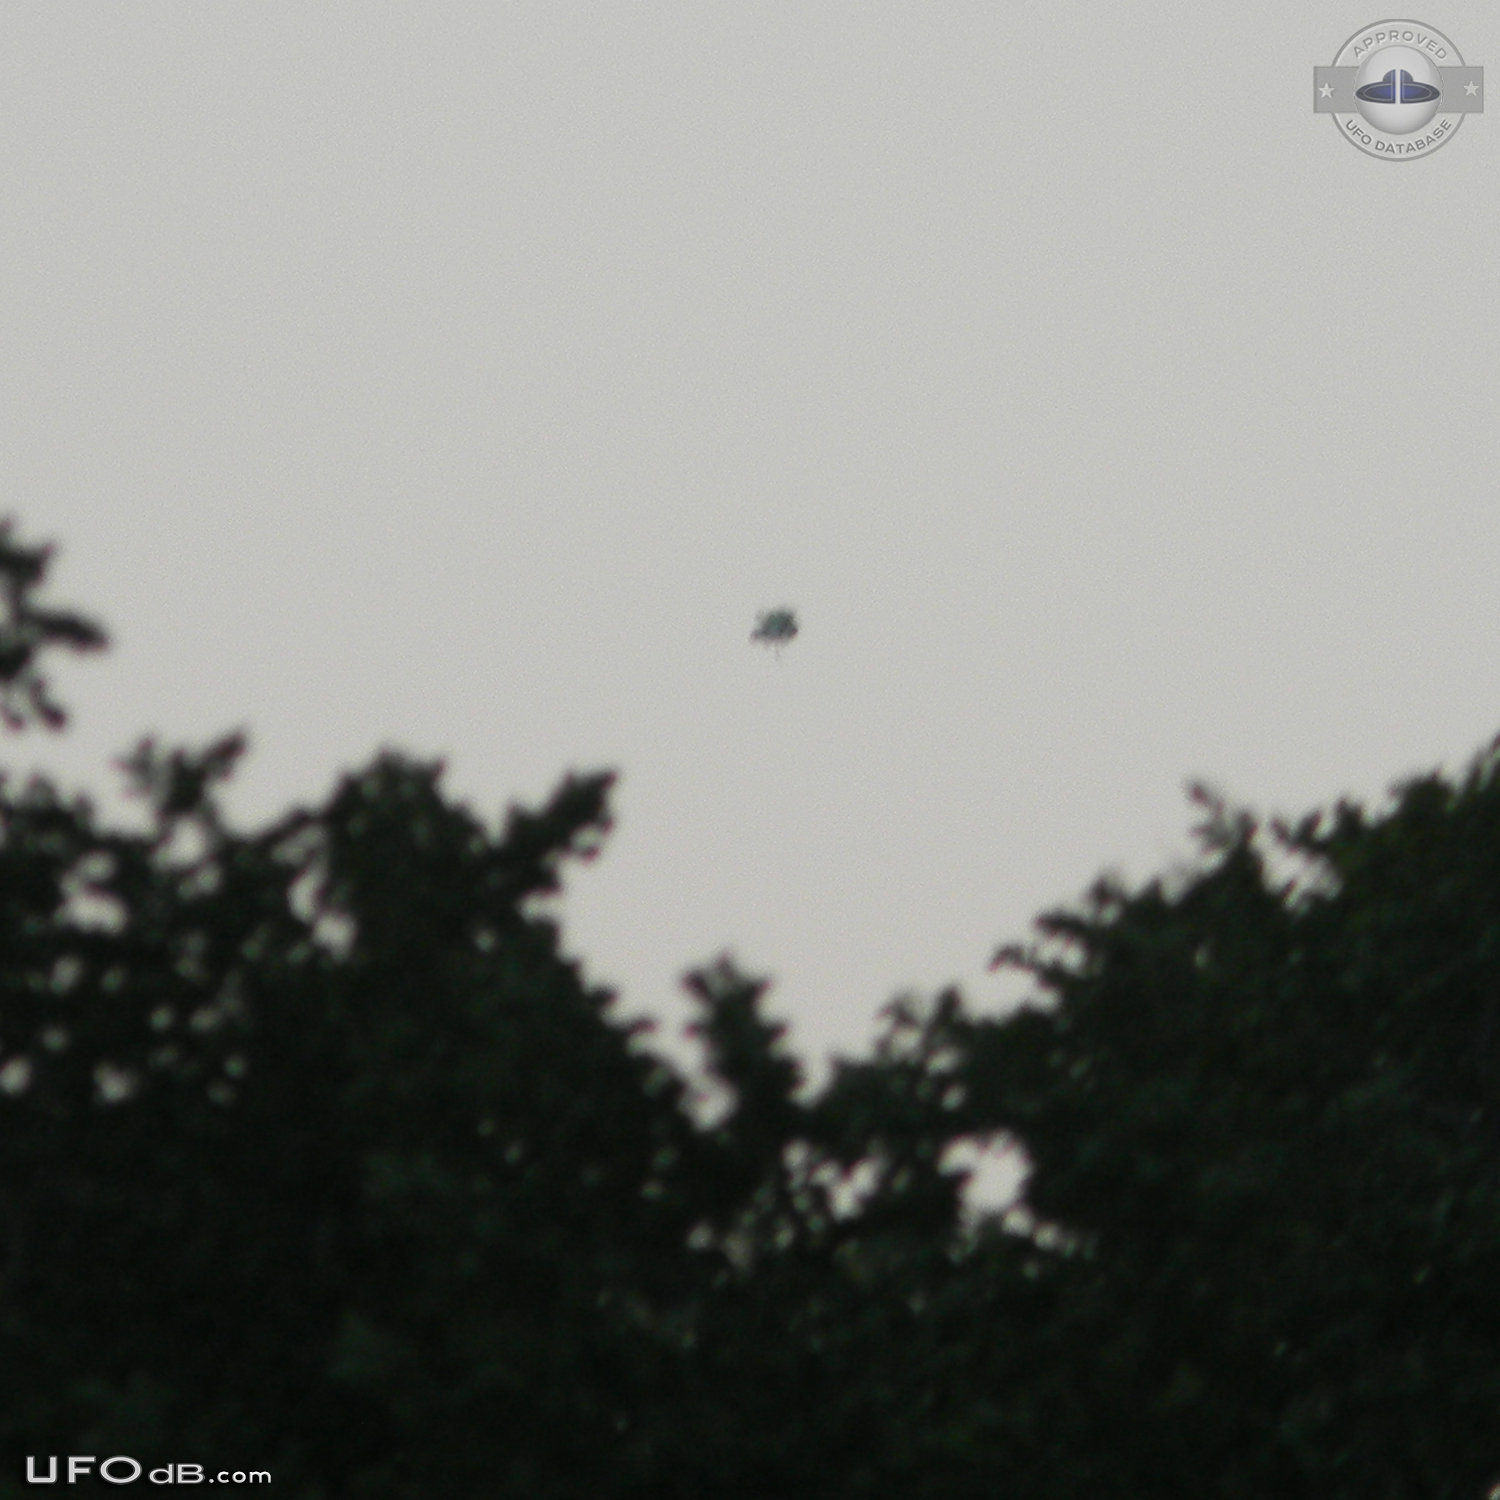 UFO hovered over Lake Lewisville in Texas and extended appendage 2014 UFO Picture #570-3